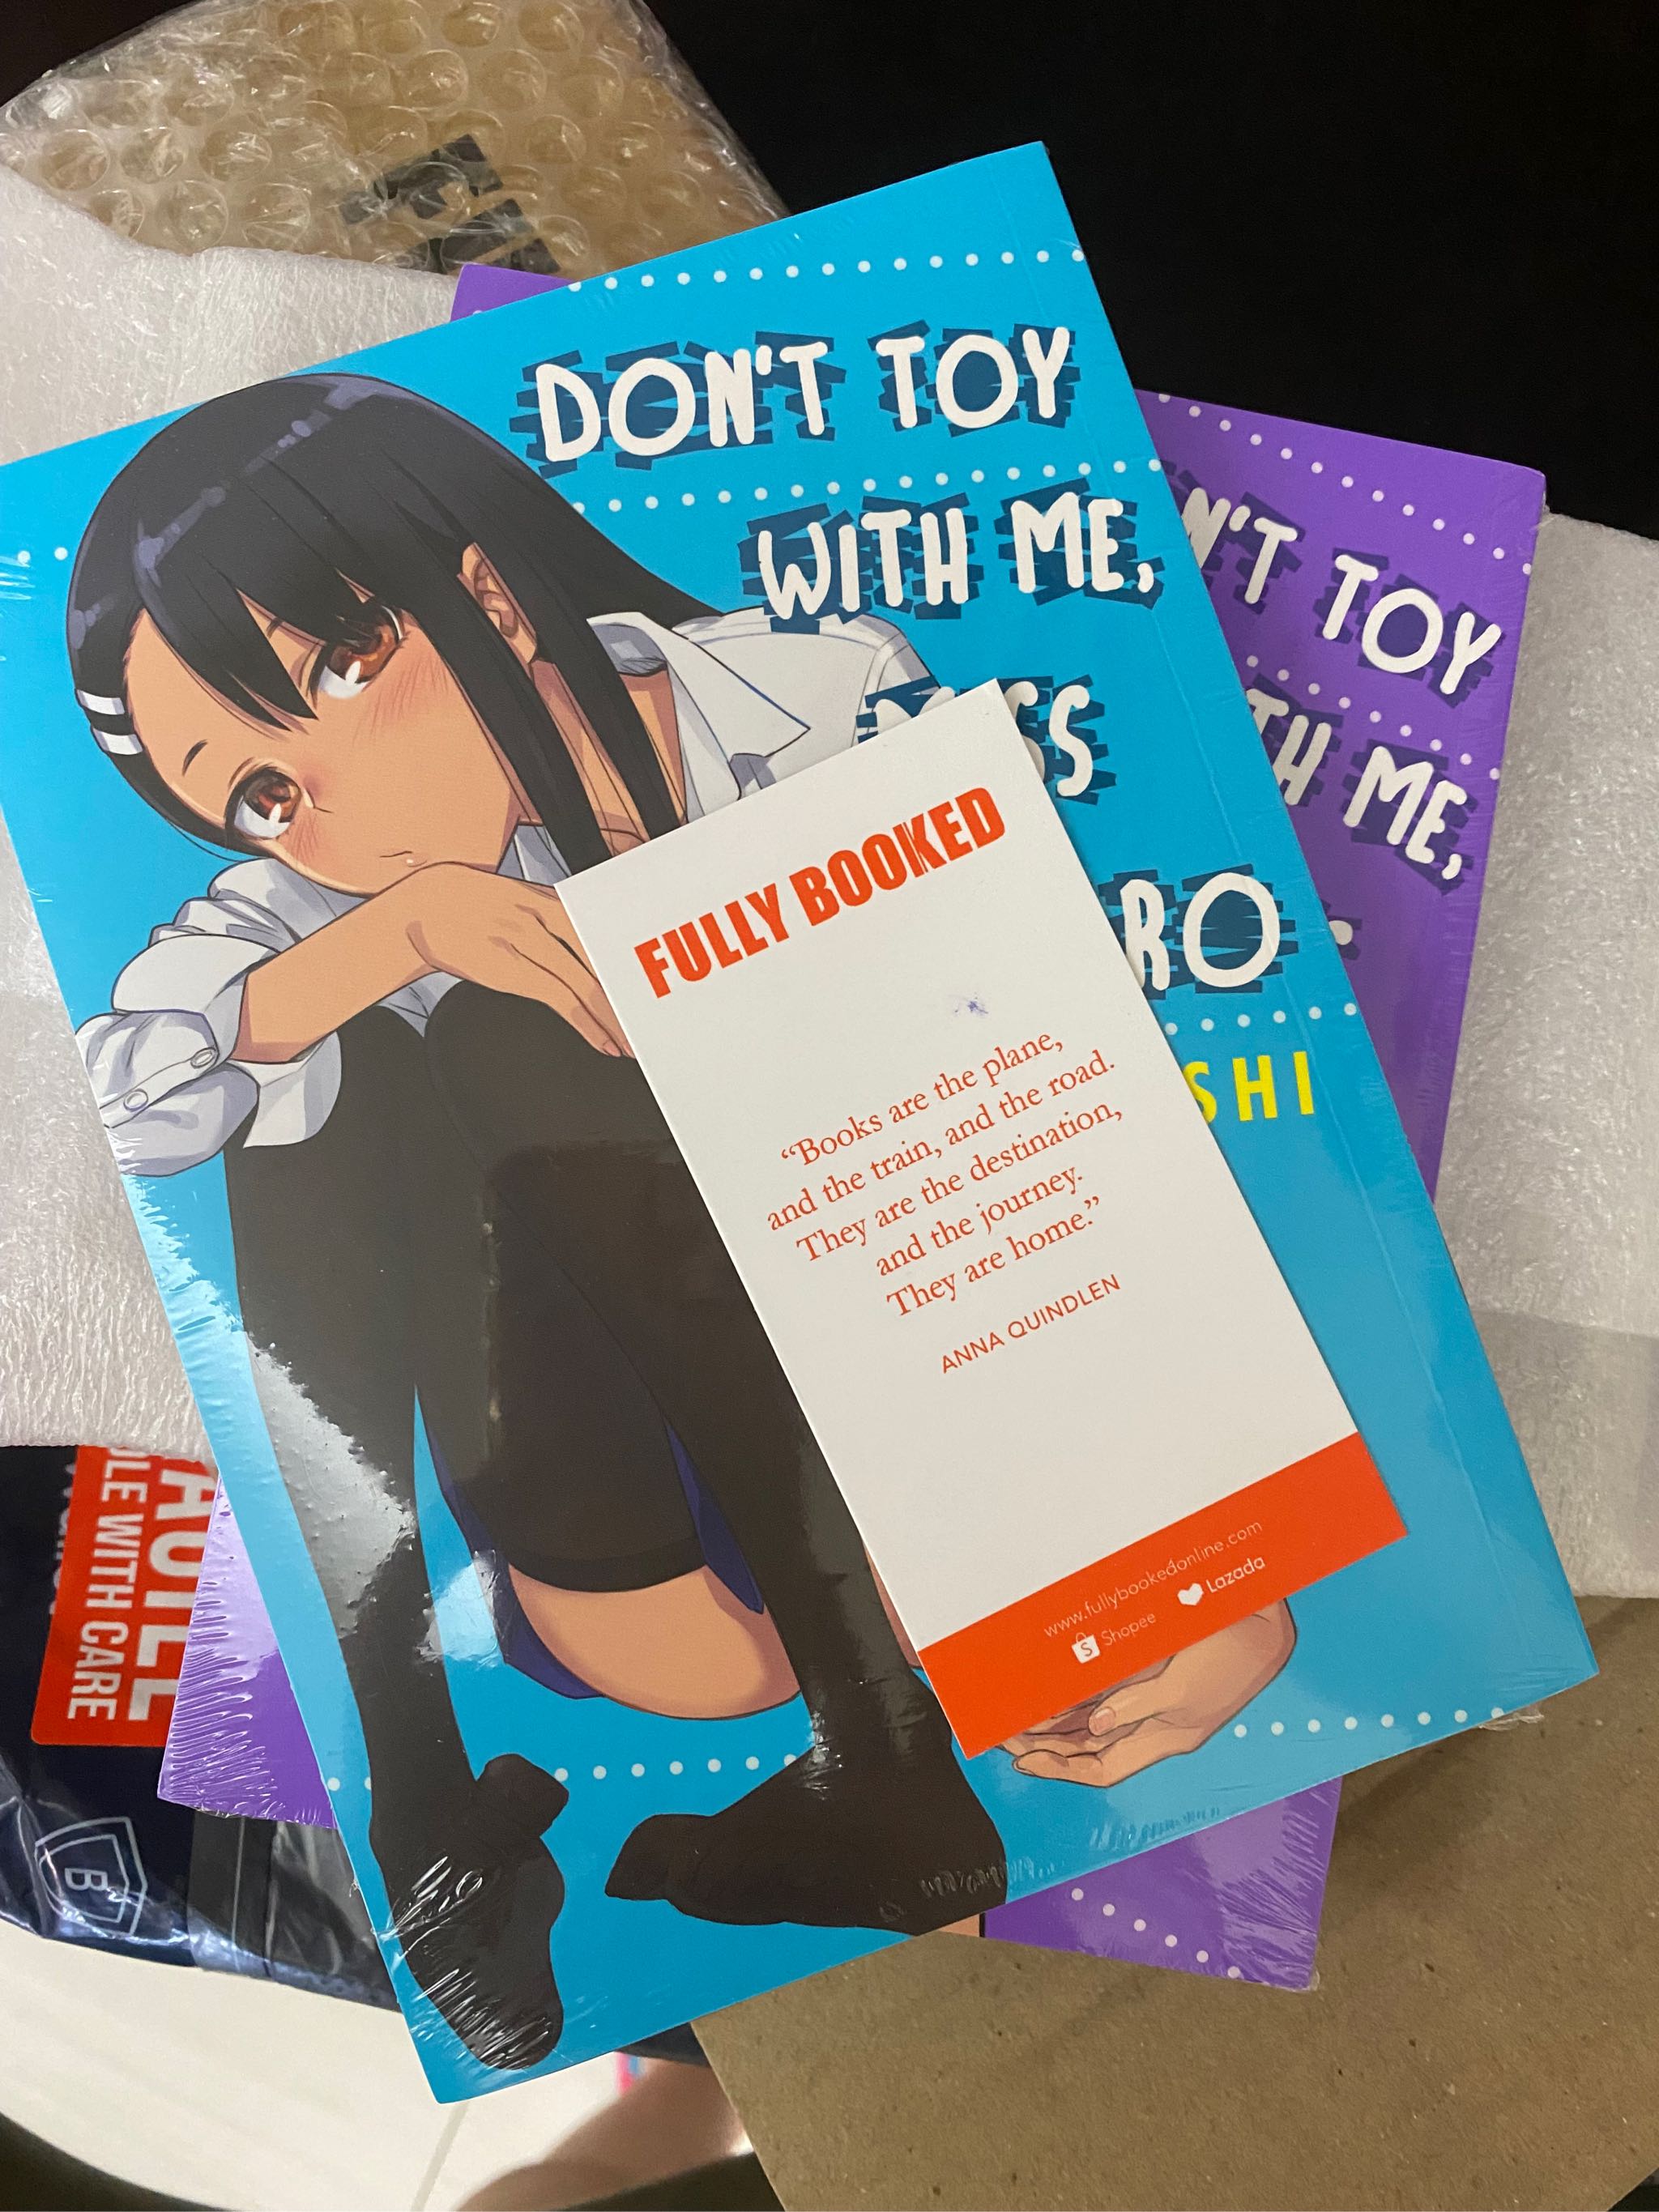 Don't Toy with Me, Miss Nagatoro: Don't Toy with Me, Miss Nagatoro 7  (Paperback) 